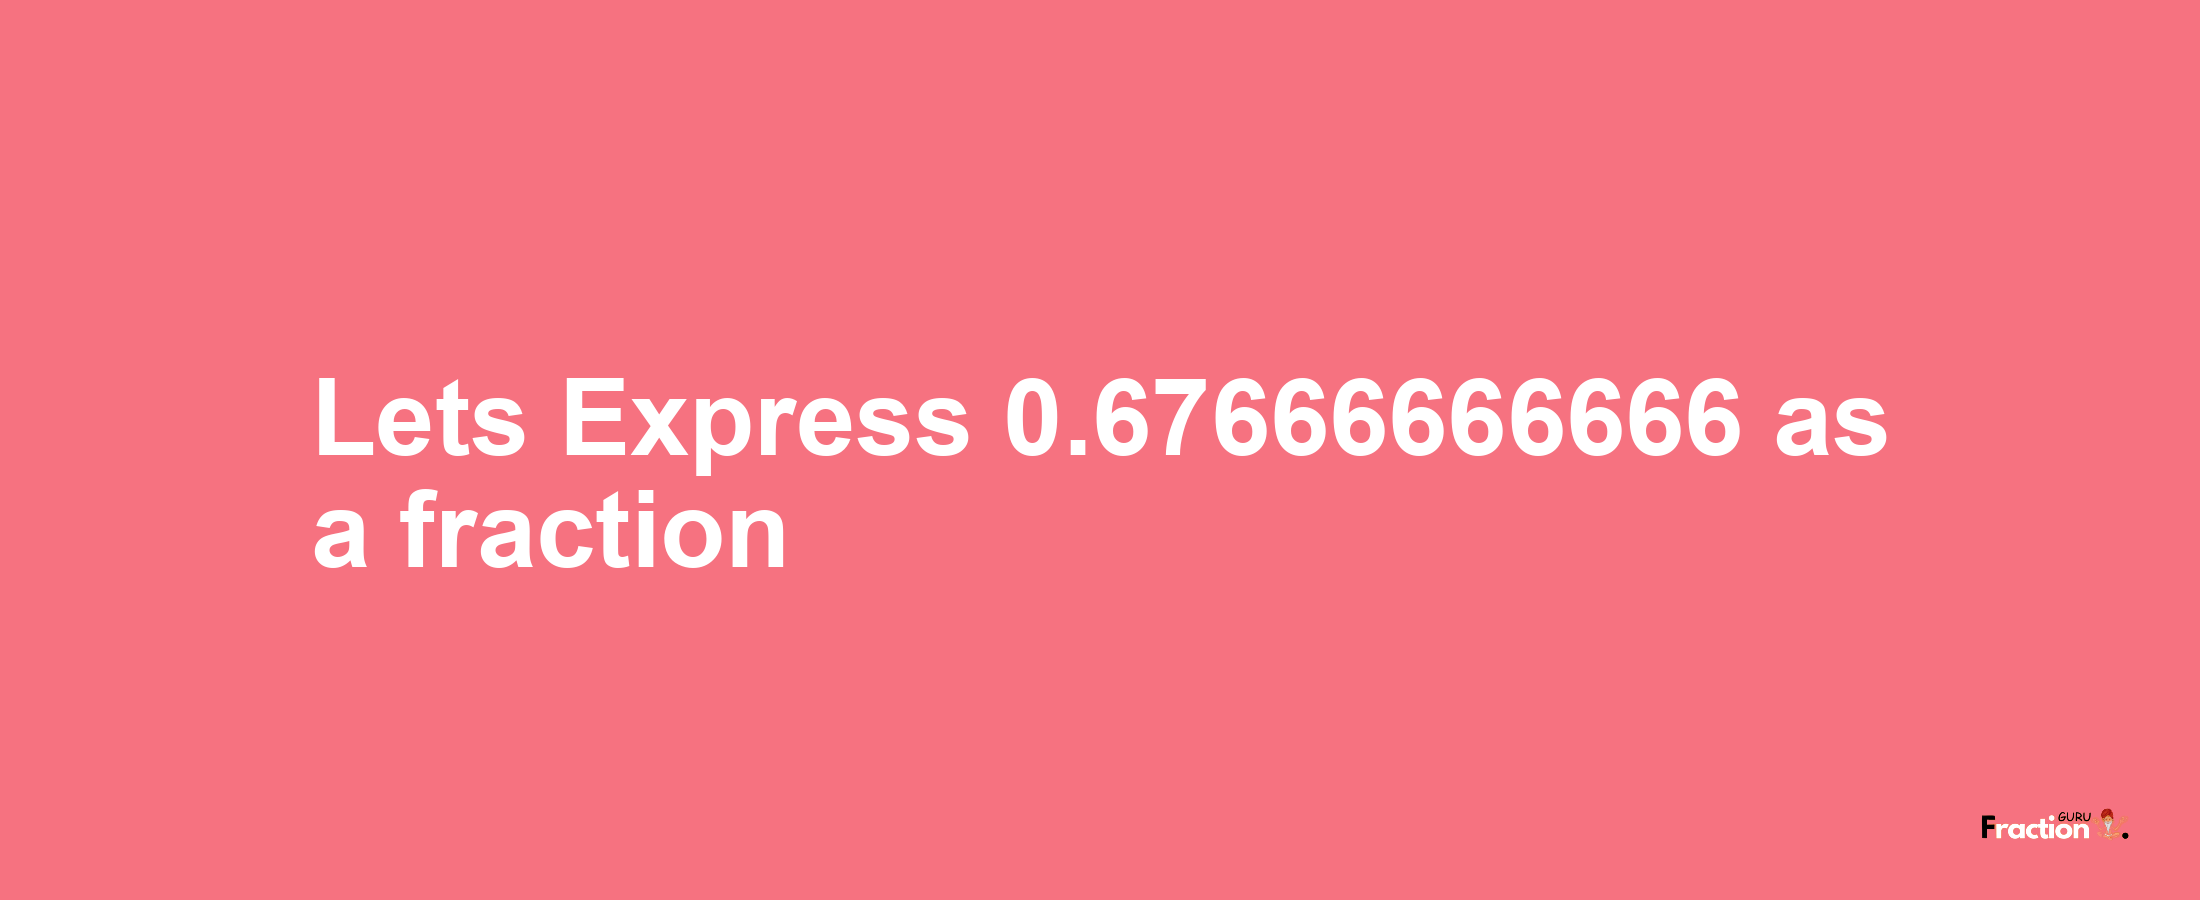 Lets Express 0.67666666666 as afraction